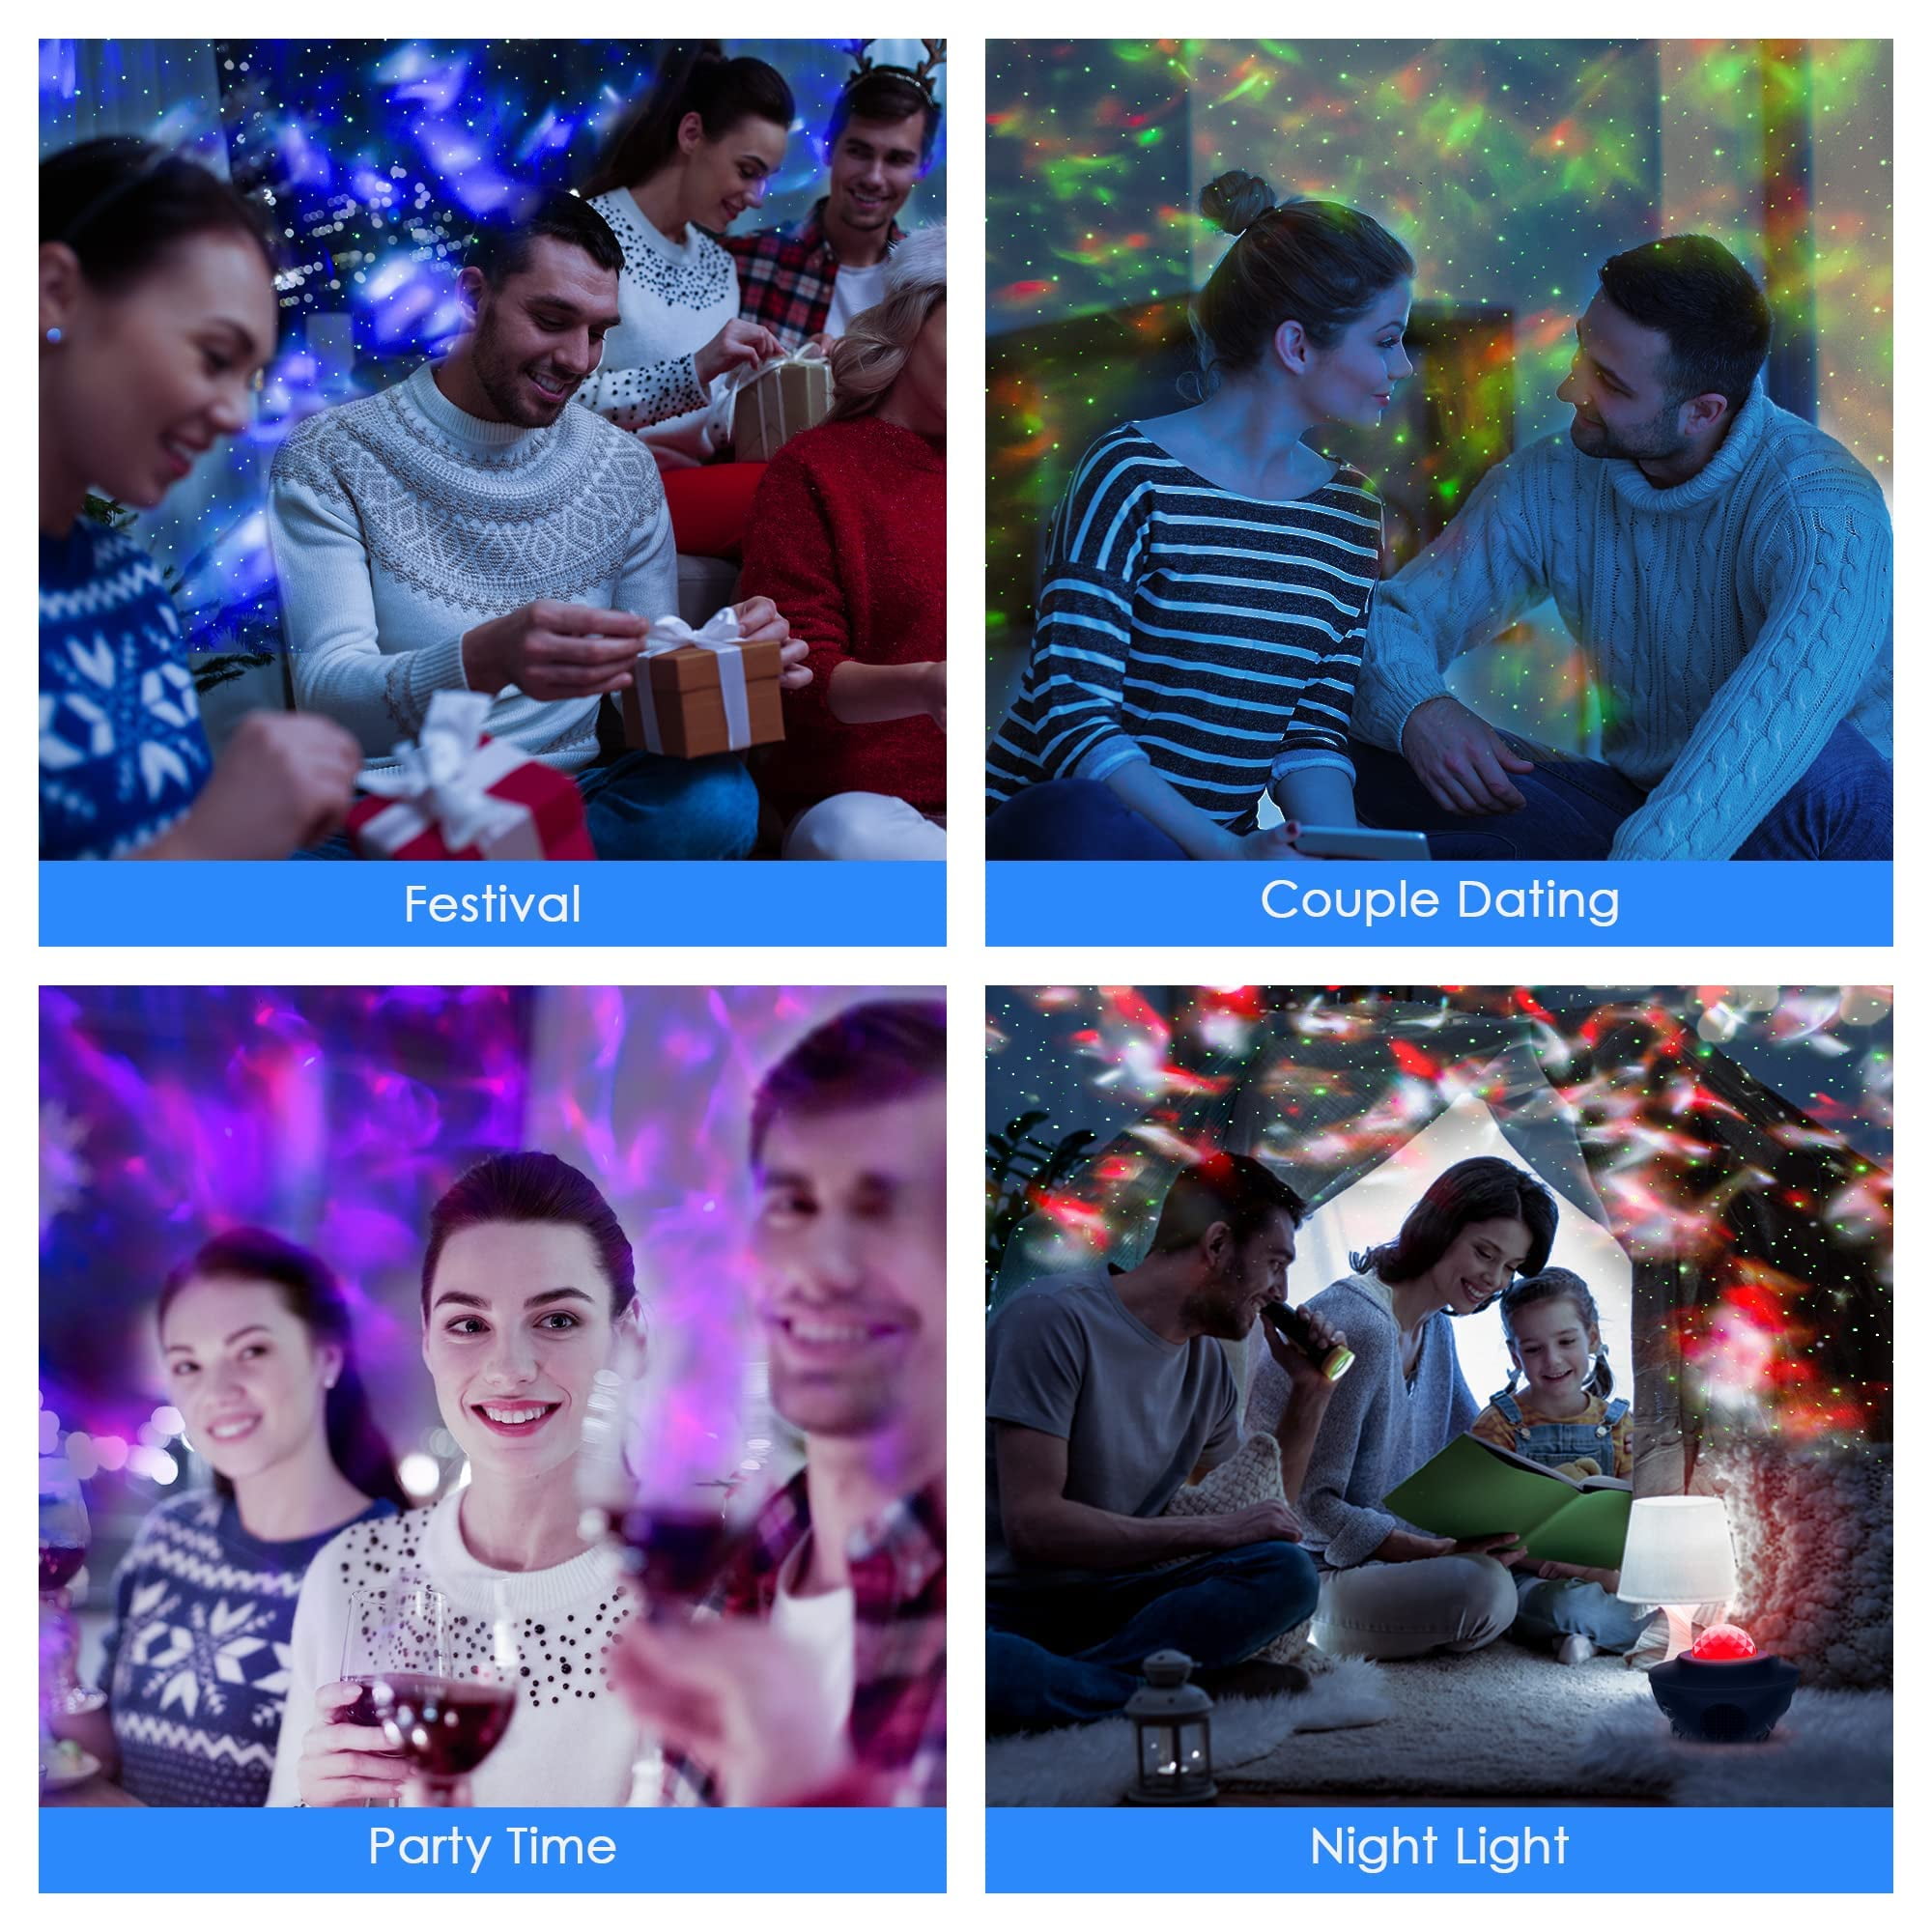 Galaxy Projector, Star Projector 3 in 1 Night Light Projector Works with  Smart App & Alexa, Google Assistant, Galaxy Light Projector with Music  Speaker & Remote Control for Bedroom Kids Adults 